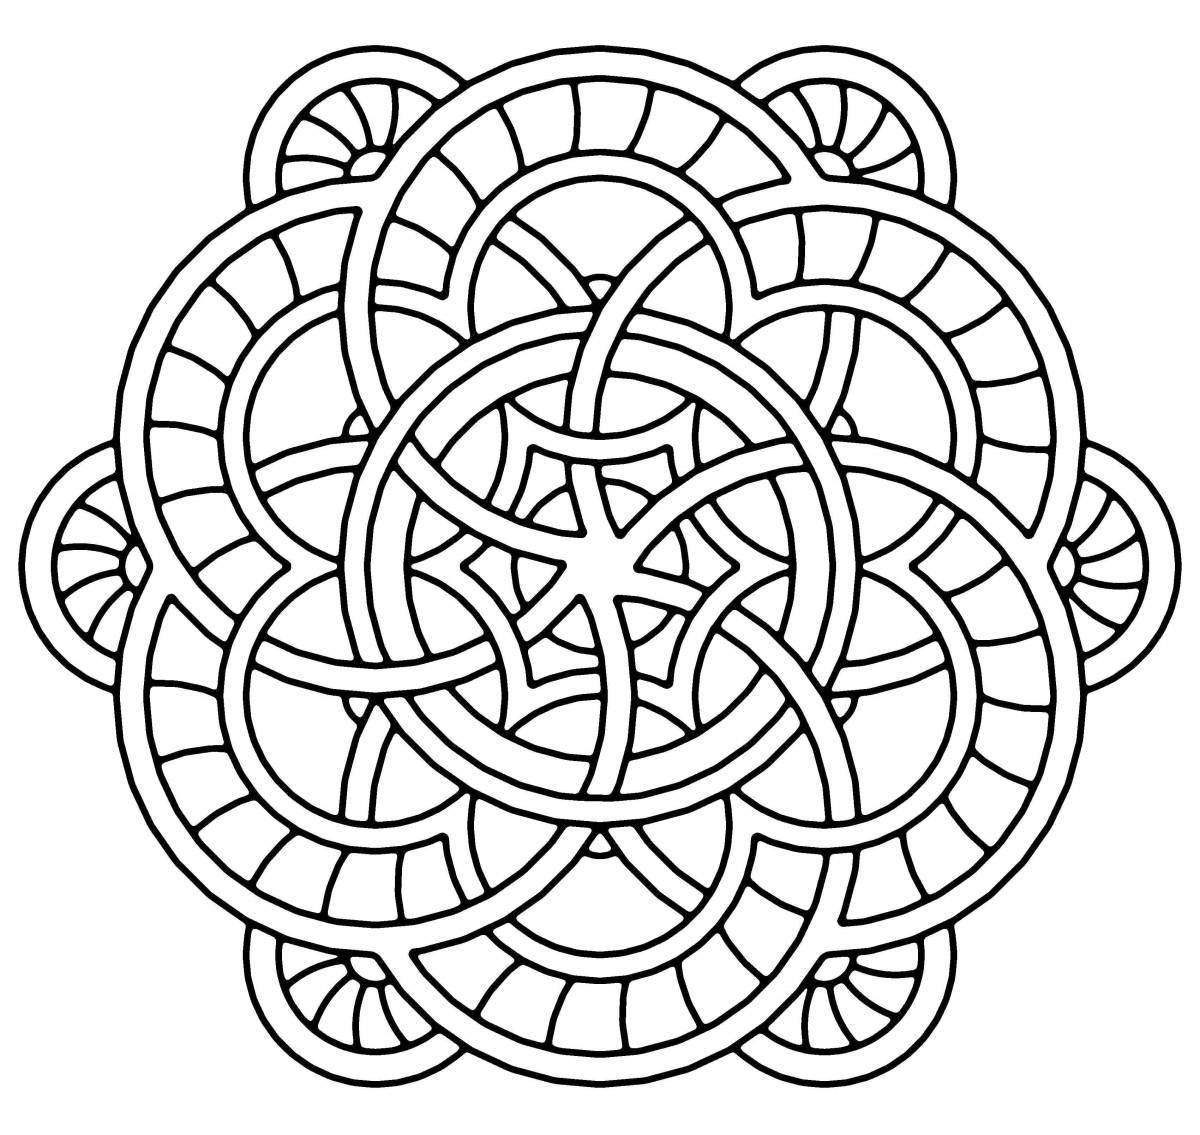 Colorful ornament coloring page